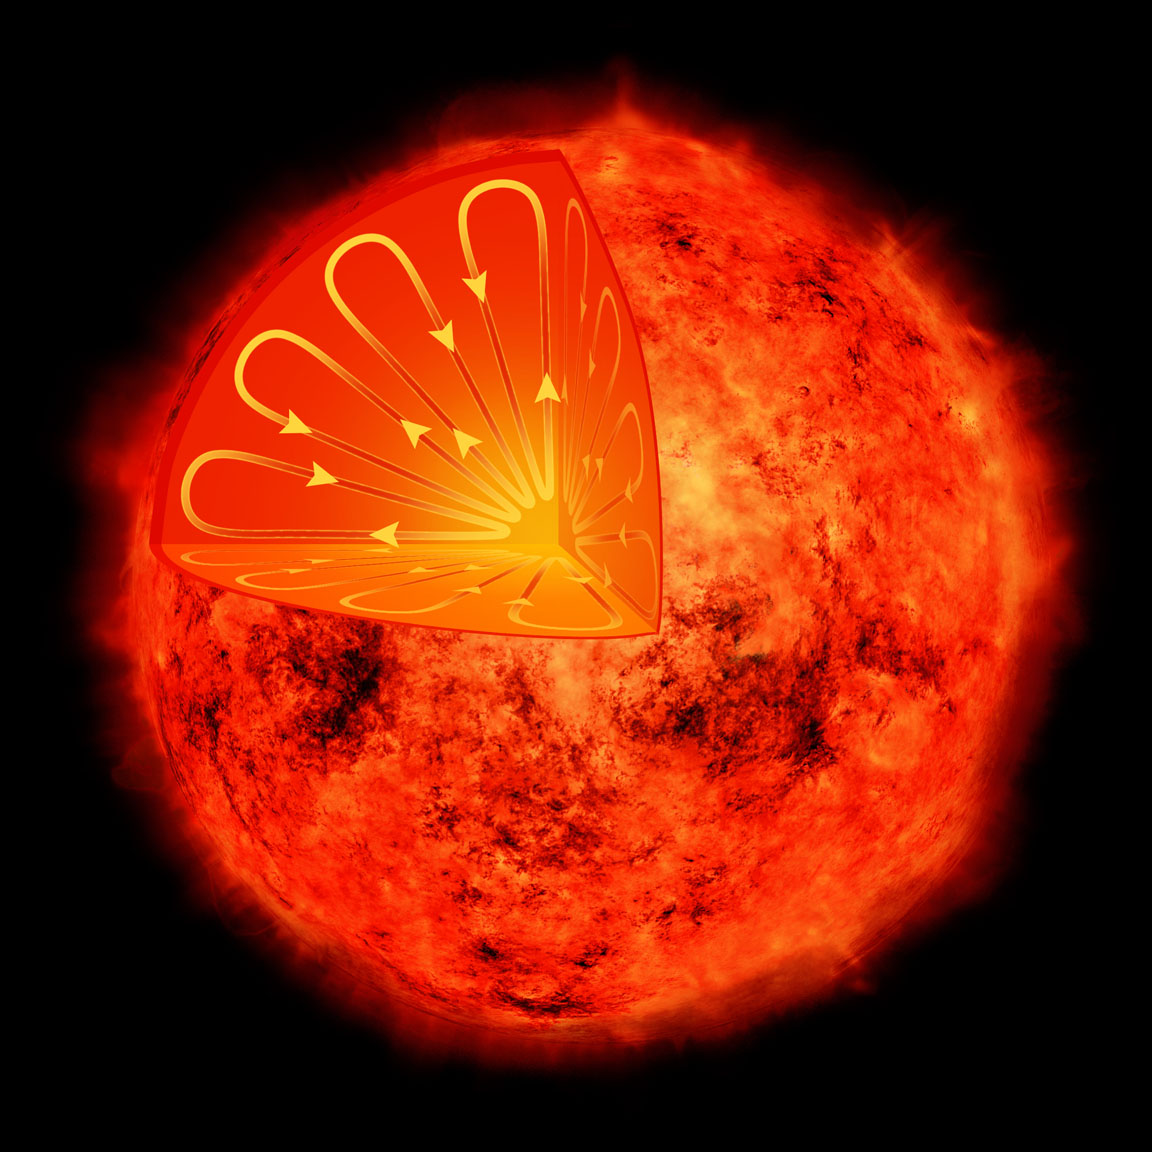 An artist&#039;s illustration depicts the interior of a low-mass star. Such stars have different interior structures than our Sun, so they are not expected to show magnetic activity cycles. However, astronomers have discovered that the nearby star Proxima Centauri defies that expectation and shows signs of a 7-year activity cycle.